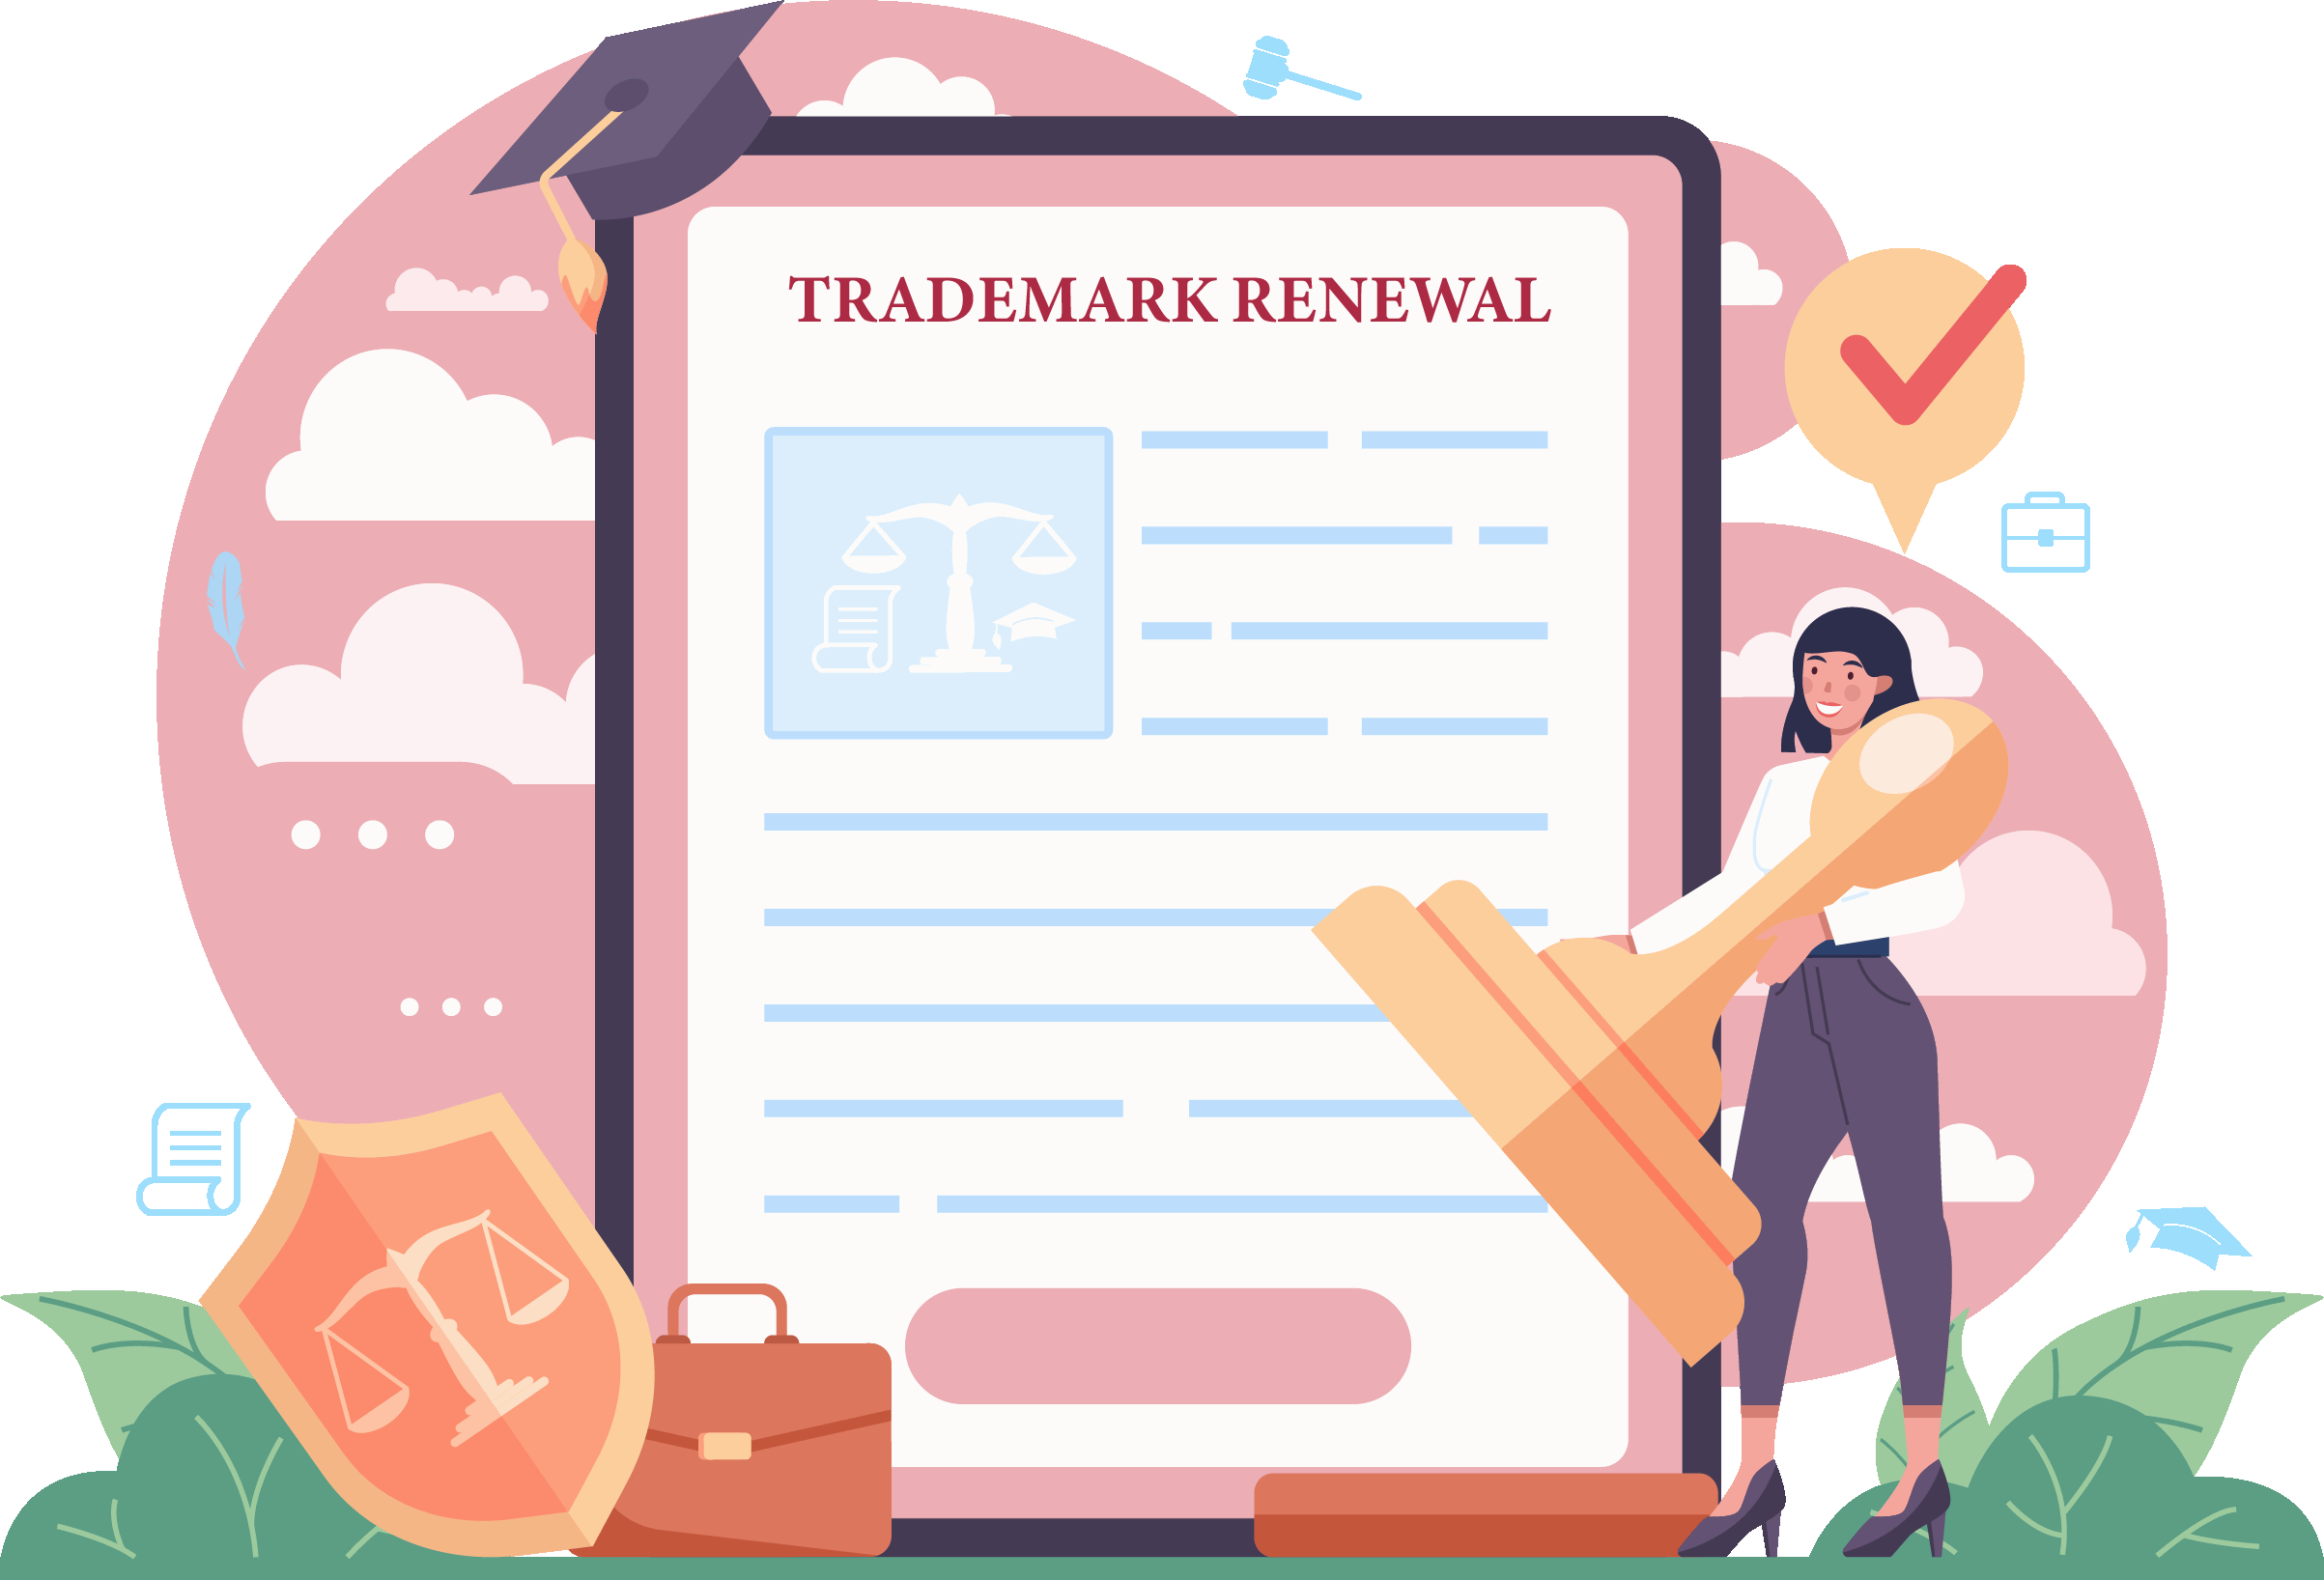 Trademark Renewal - Now protect your brand identity by renewing your trademark in just a few simple steps with corporate junction